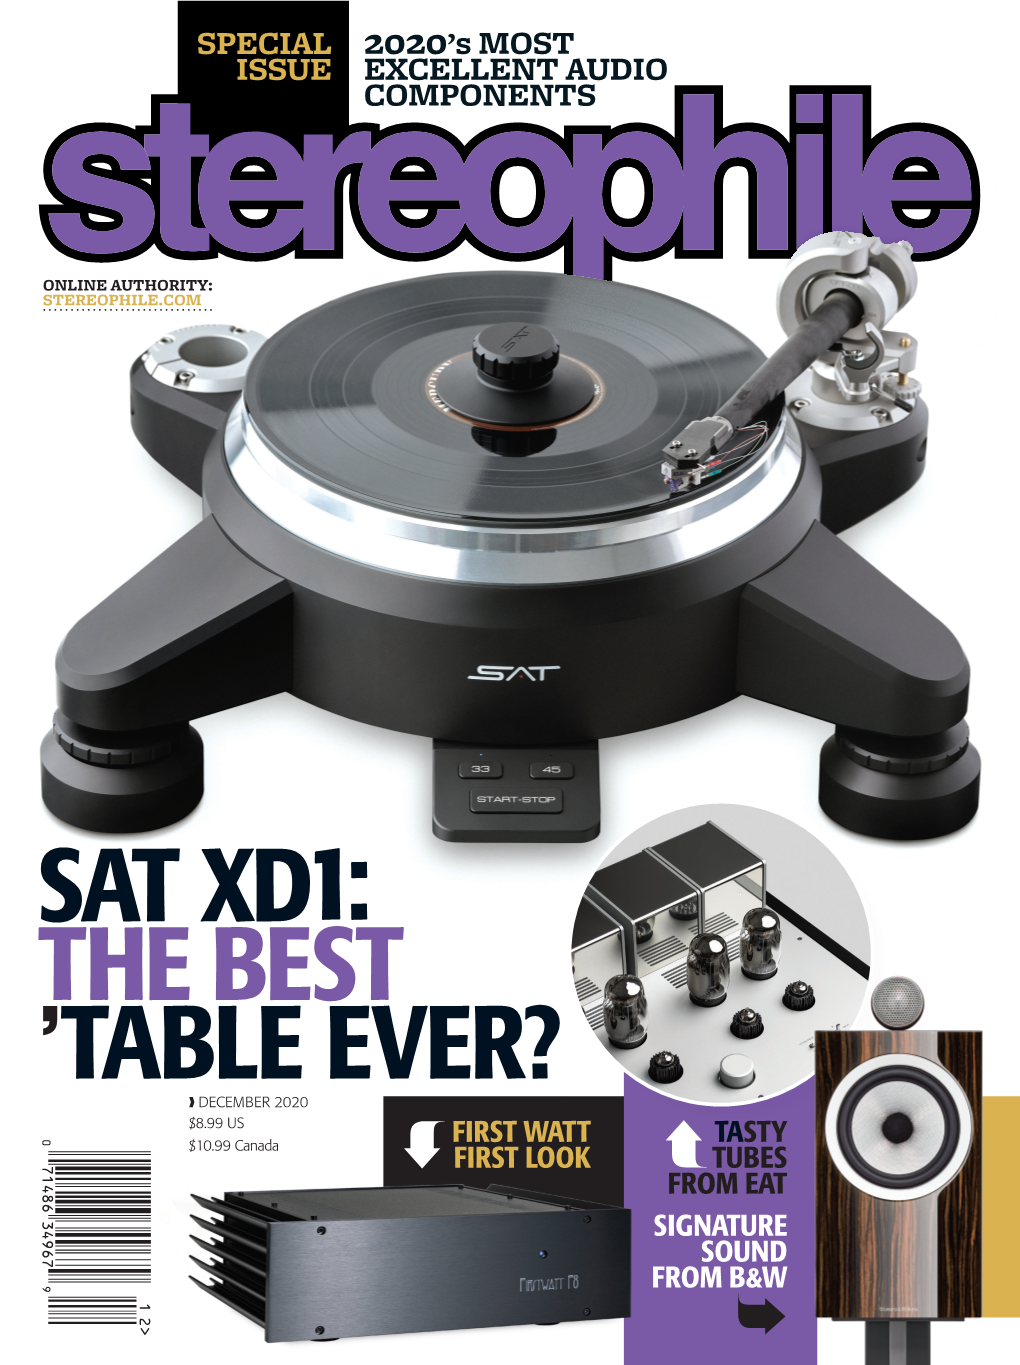 SAT XD1: the BEST TABLE EVER? ❱ DECEMBER 2020 $8.99 US FIRST WATT TASTY $10.99 Canada FIRST LOOK TUBES from EAT SIGNATURE SOUND from B&W EQUIPMENT REPORT